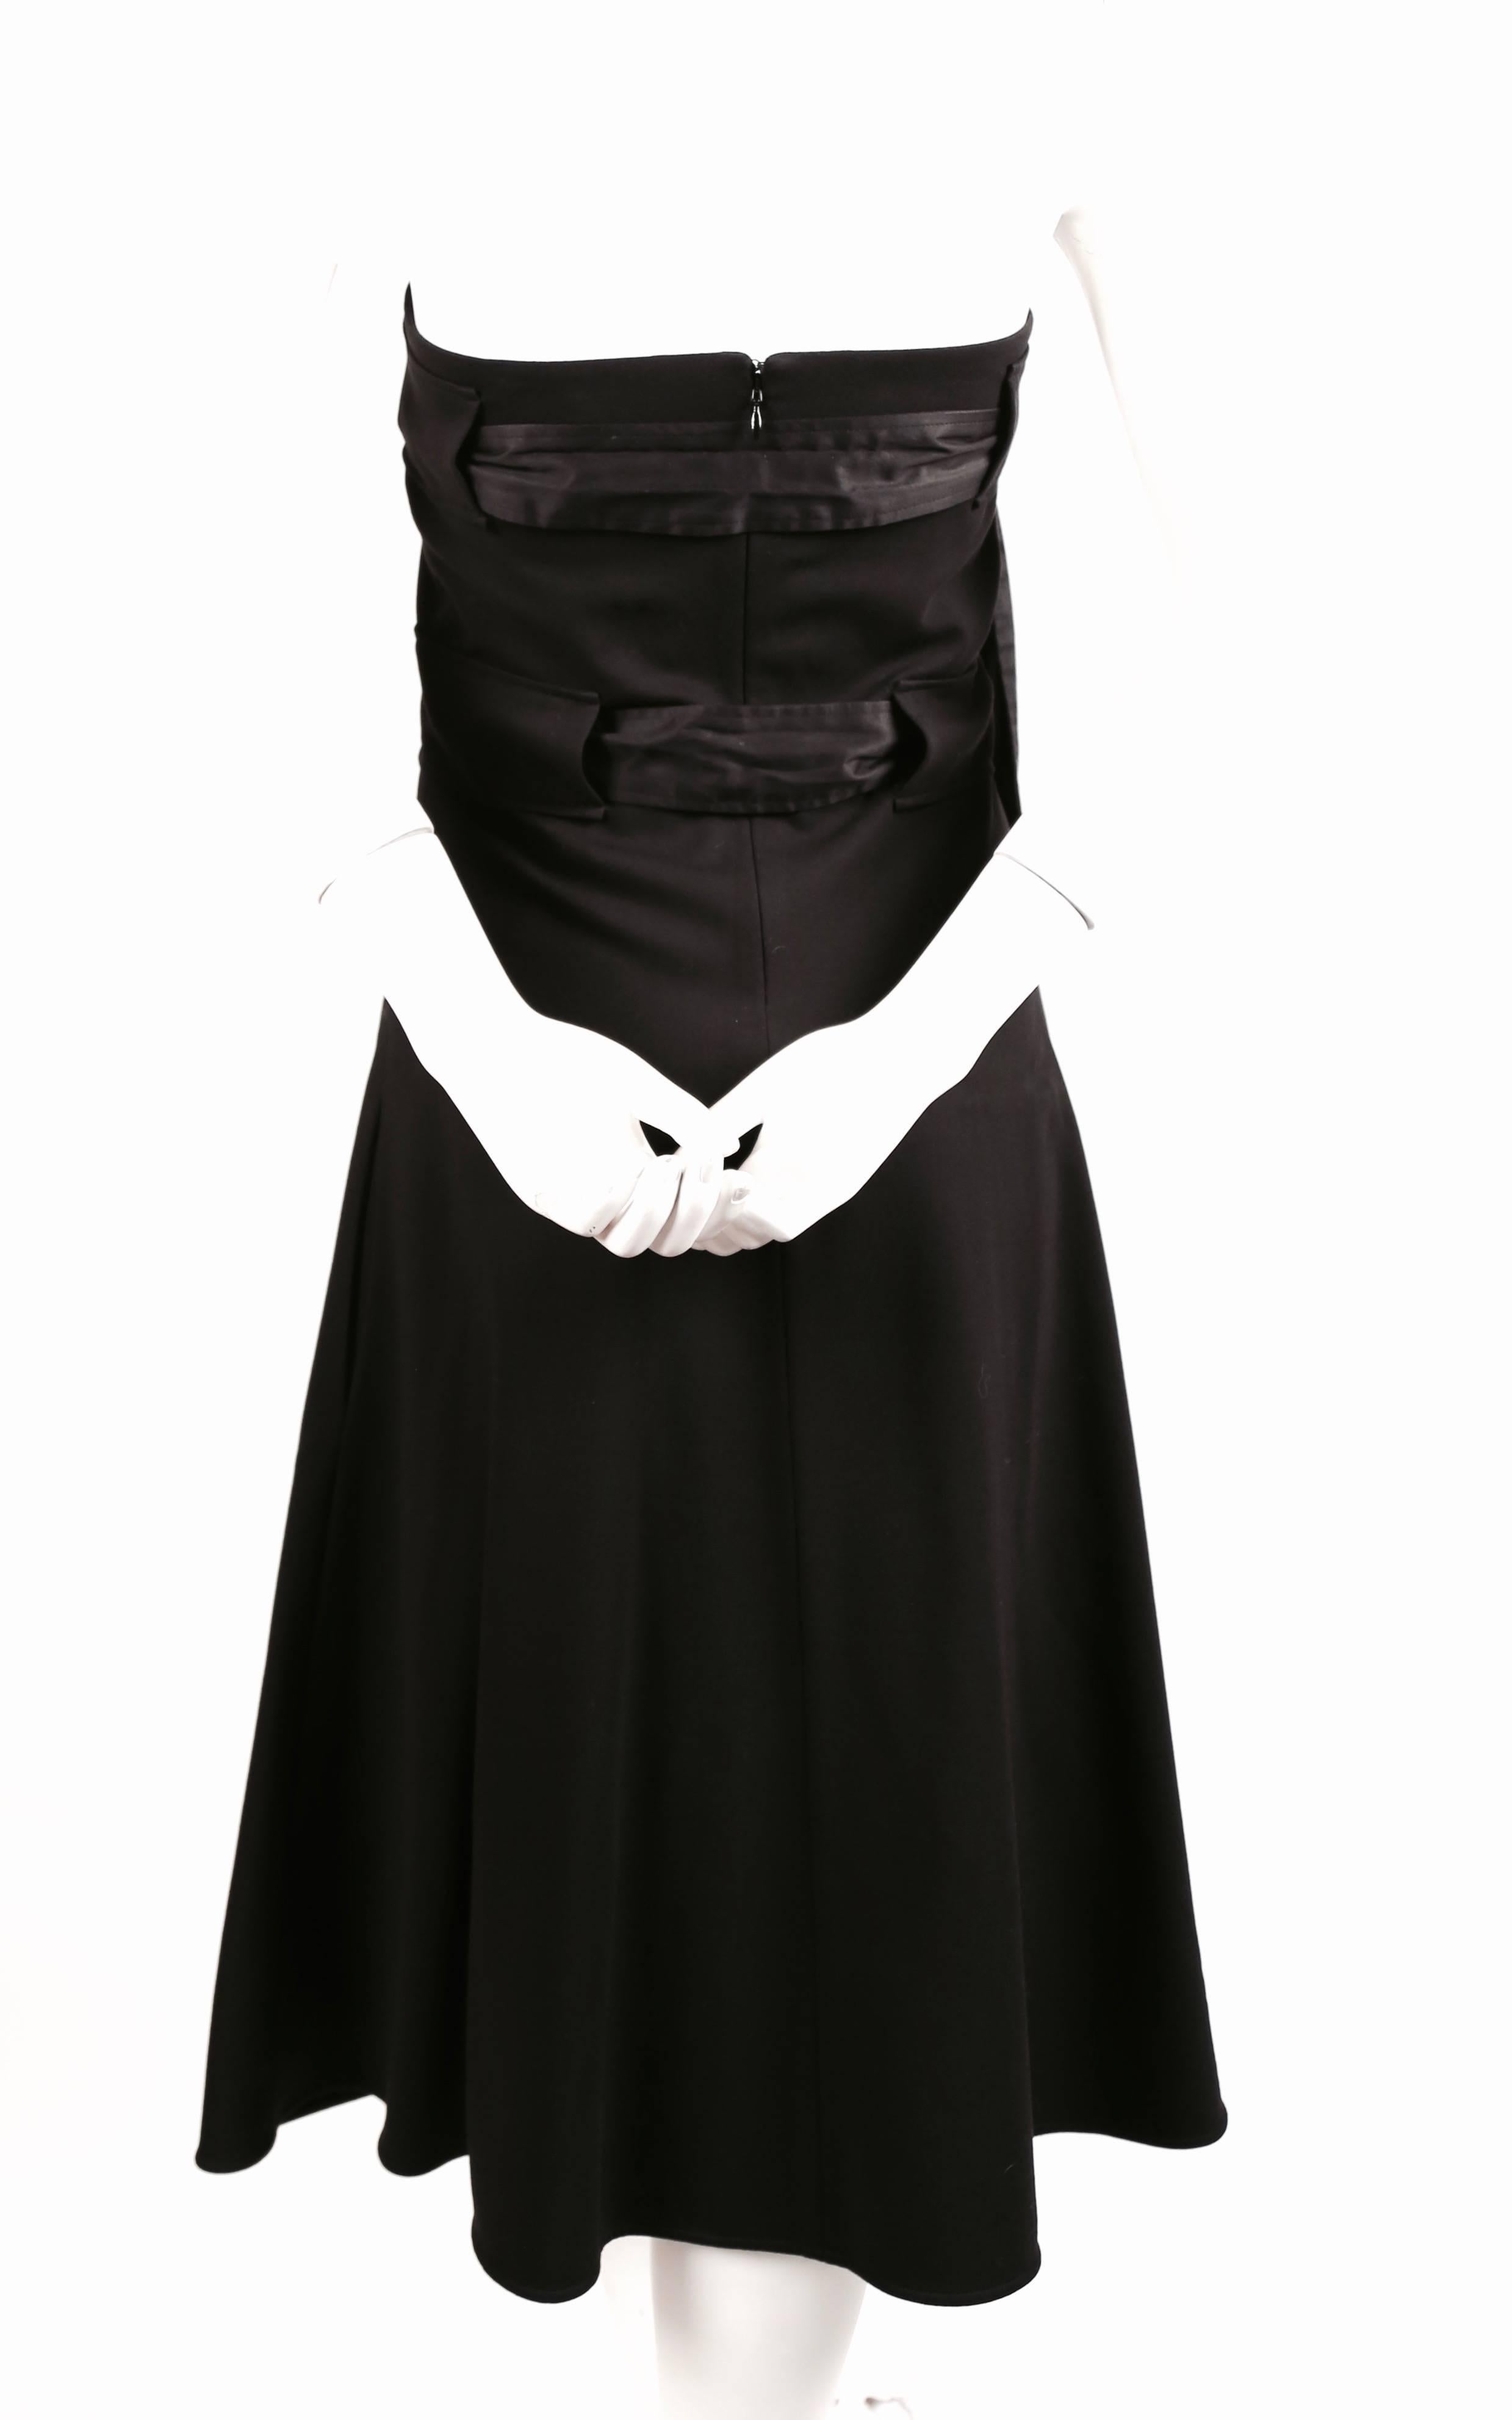 Jet black strapless dress with straps at bust and waist designed by Phoebe Philo for Celine. French size 38 (fits small). Can be dressed up or down. New with tags.